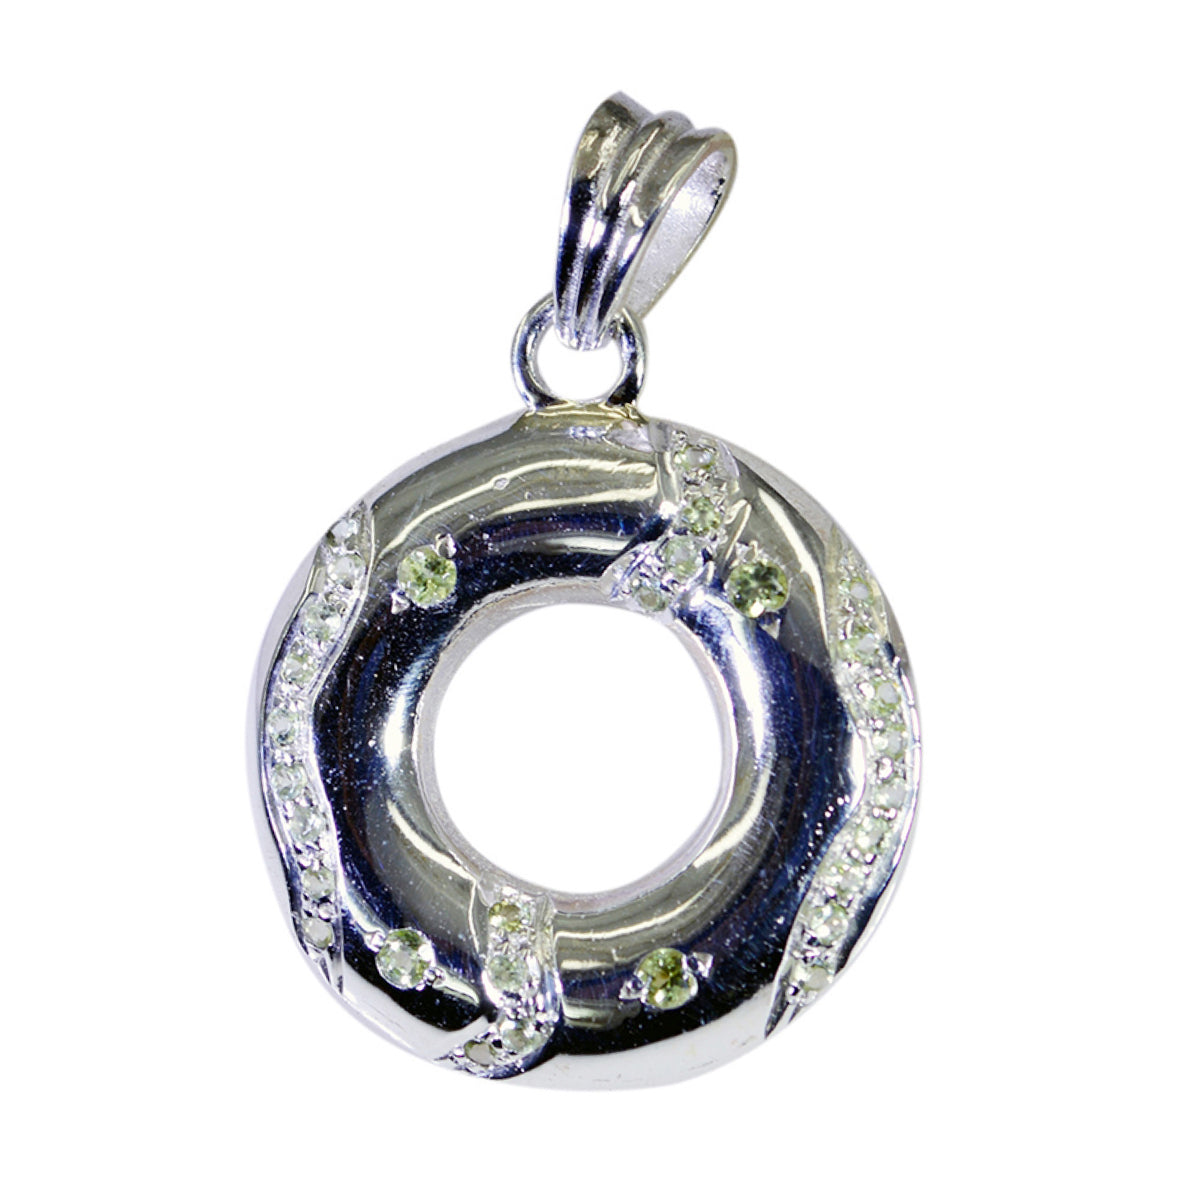 Riyo Beauteous Gemstone Round Faceted Green Peridot 1112 Sterling Silver Pendant Gift For Girlfriend